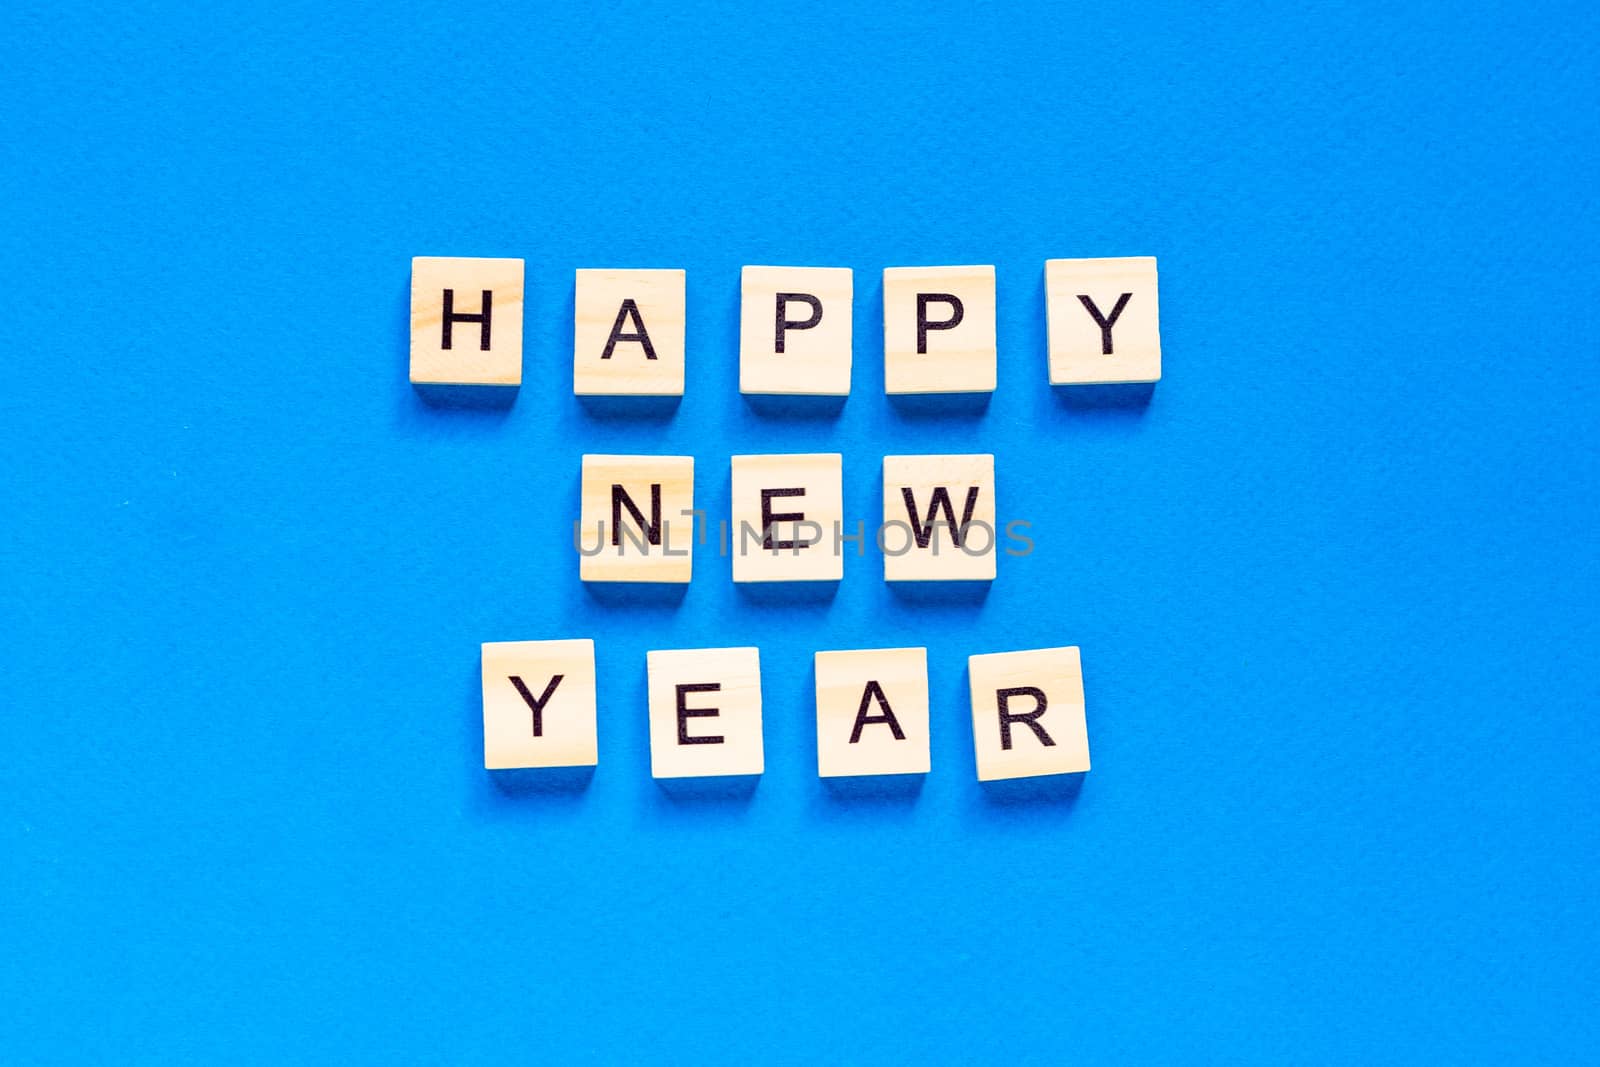 Happy New year written in wooden letters on a blue background. Happy new year 2021. flat layout. space for text. top view. by Pirlik